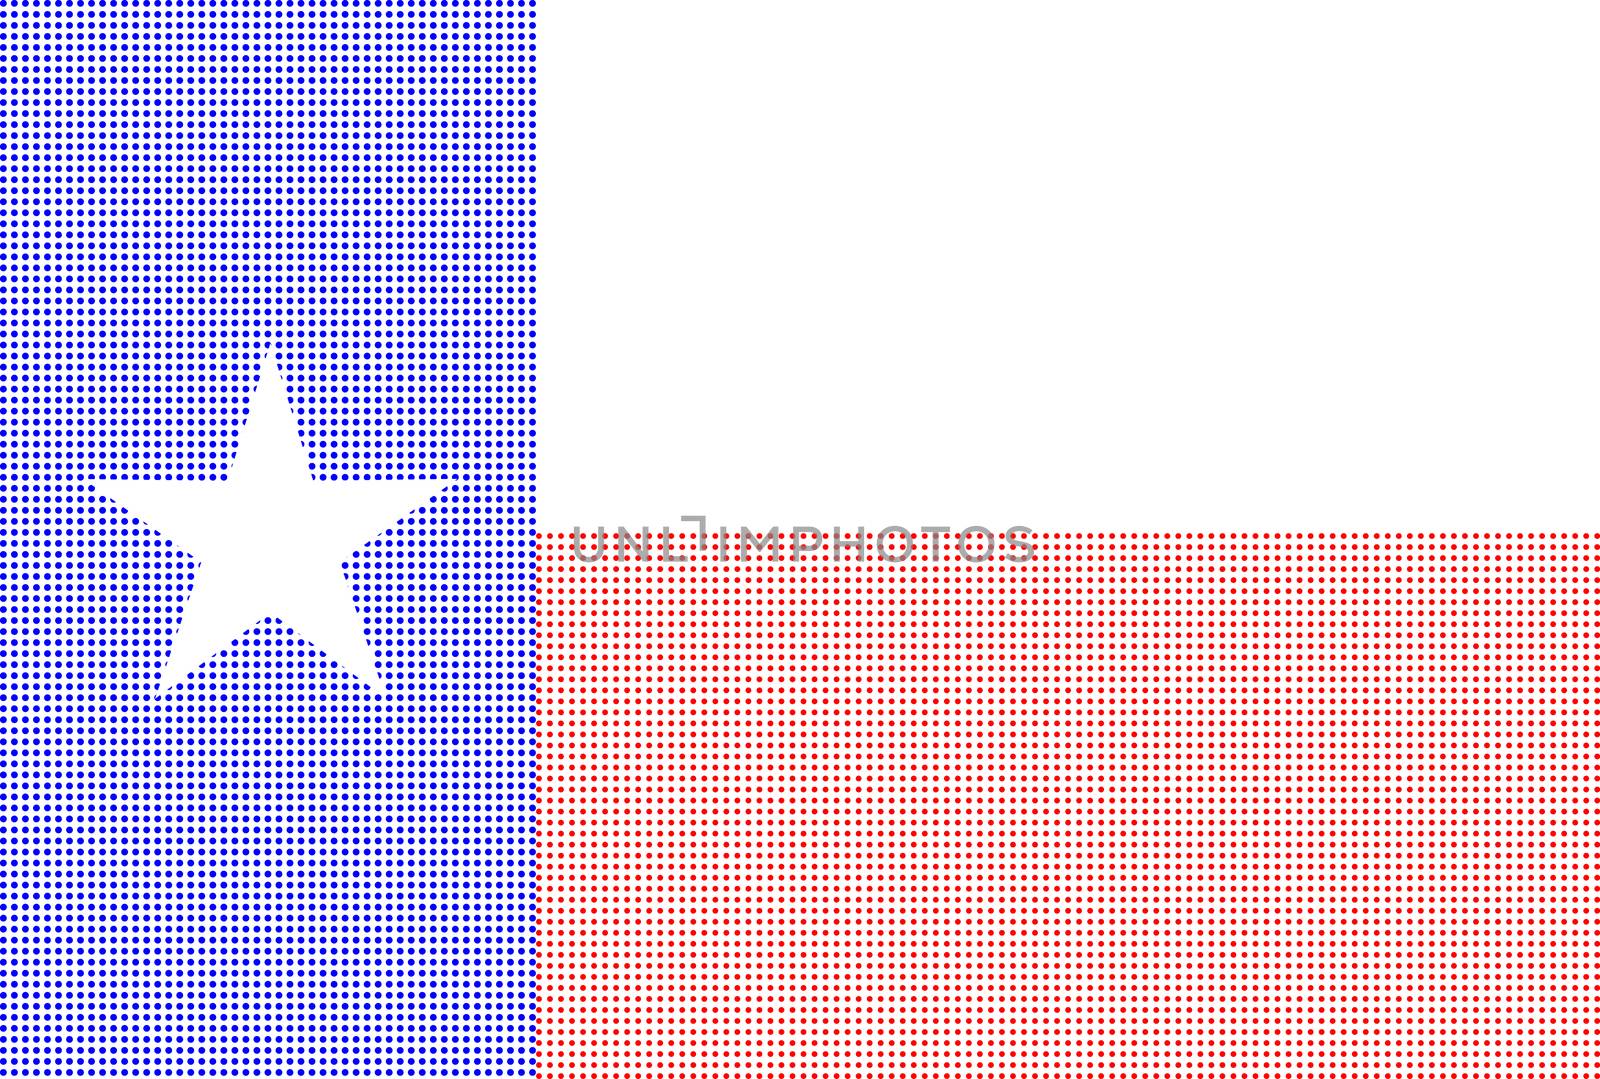 The flag of the USA state of TEXAS in halftone